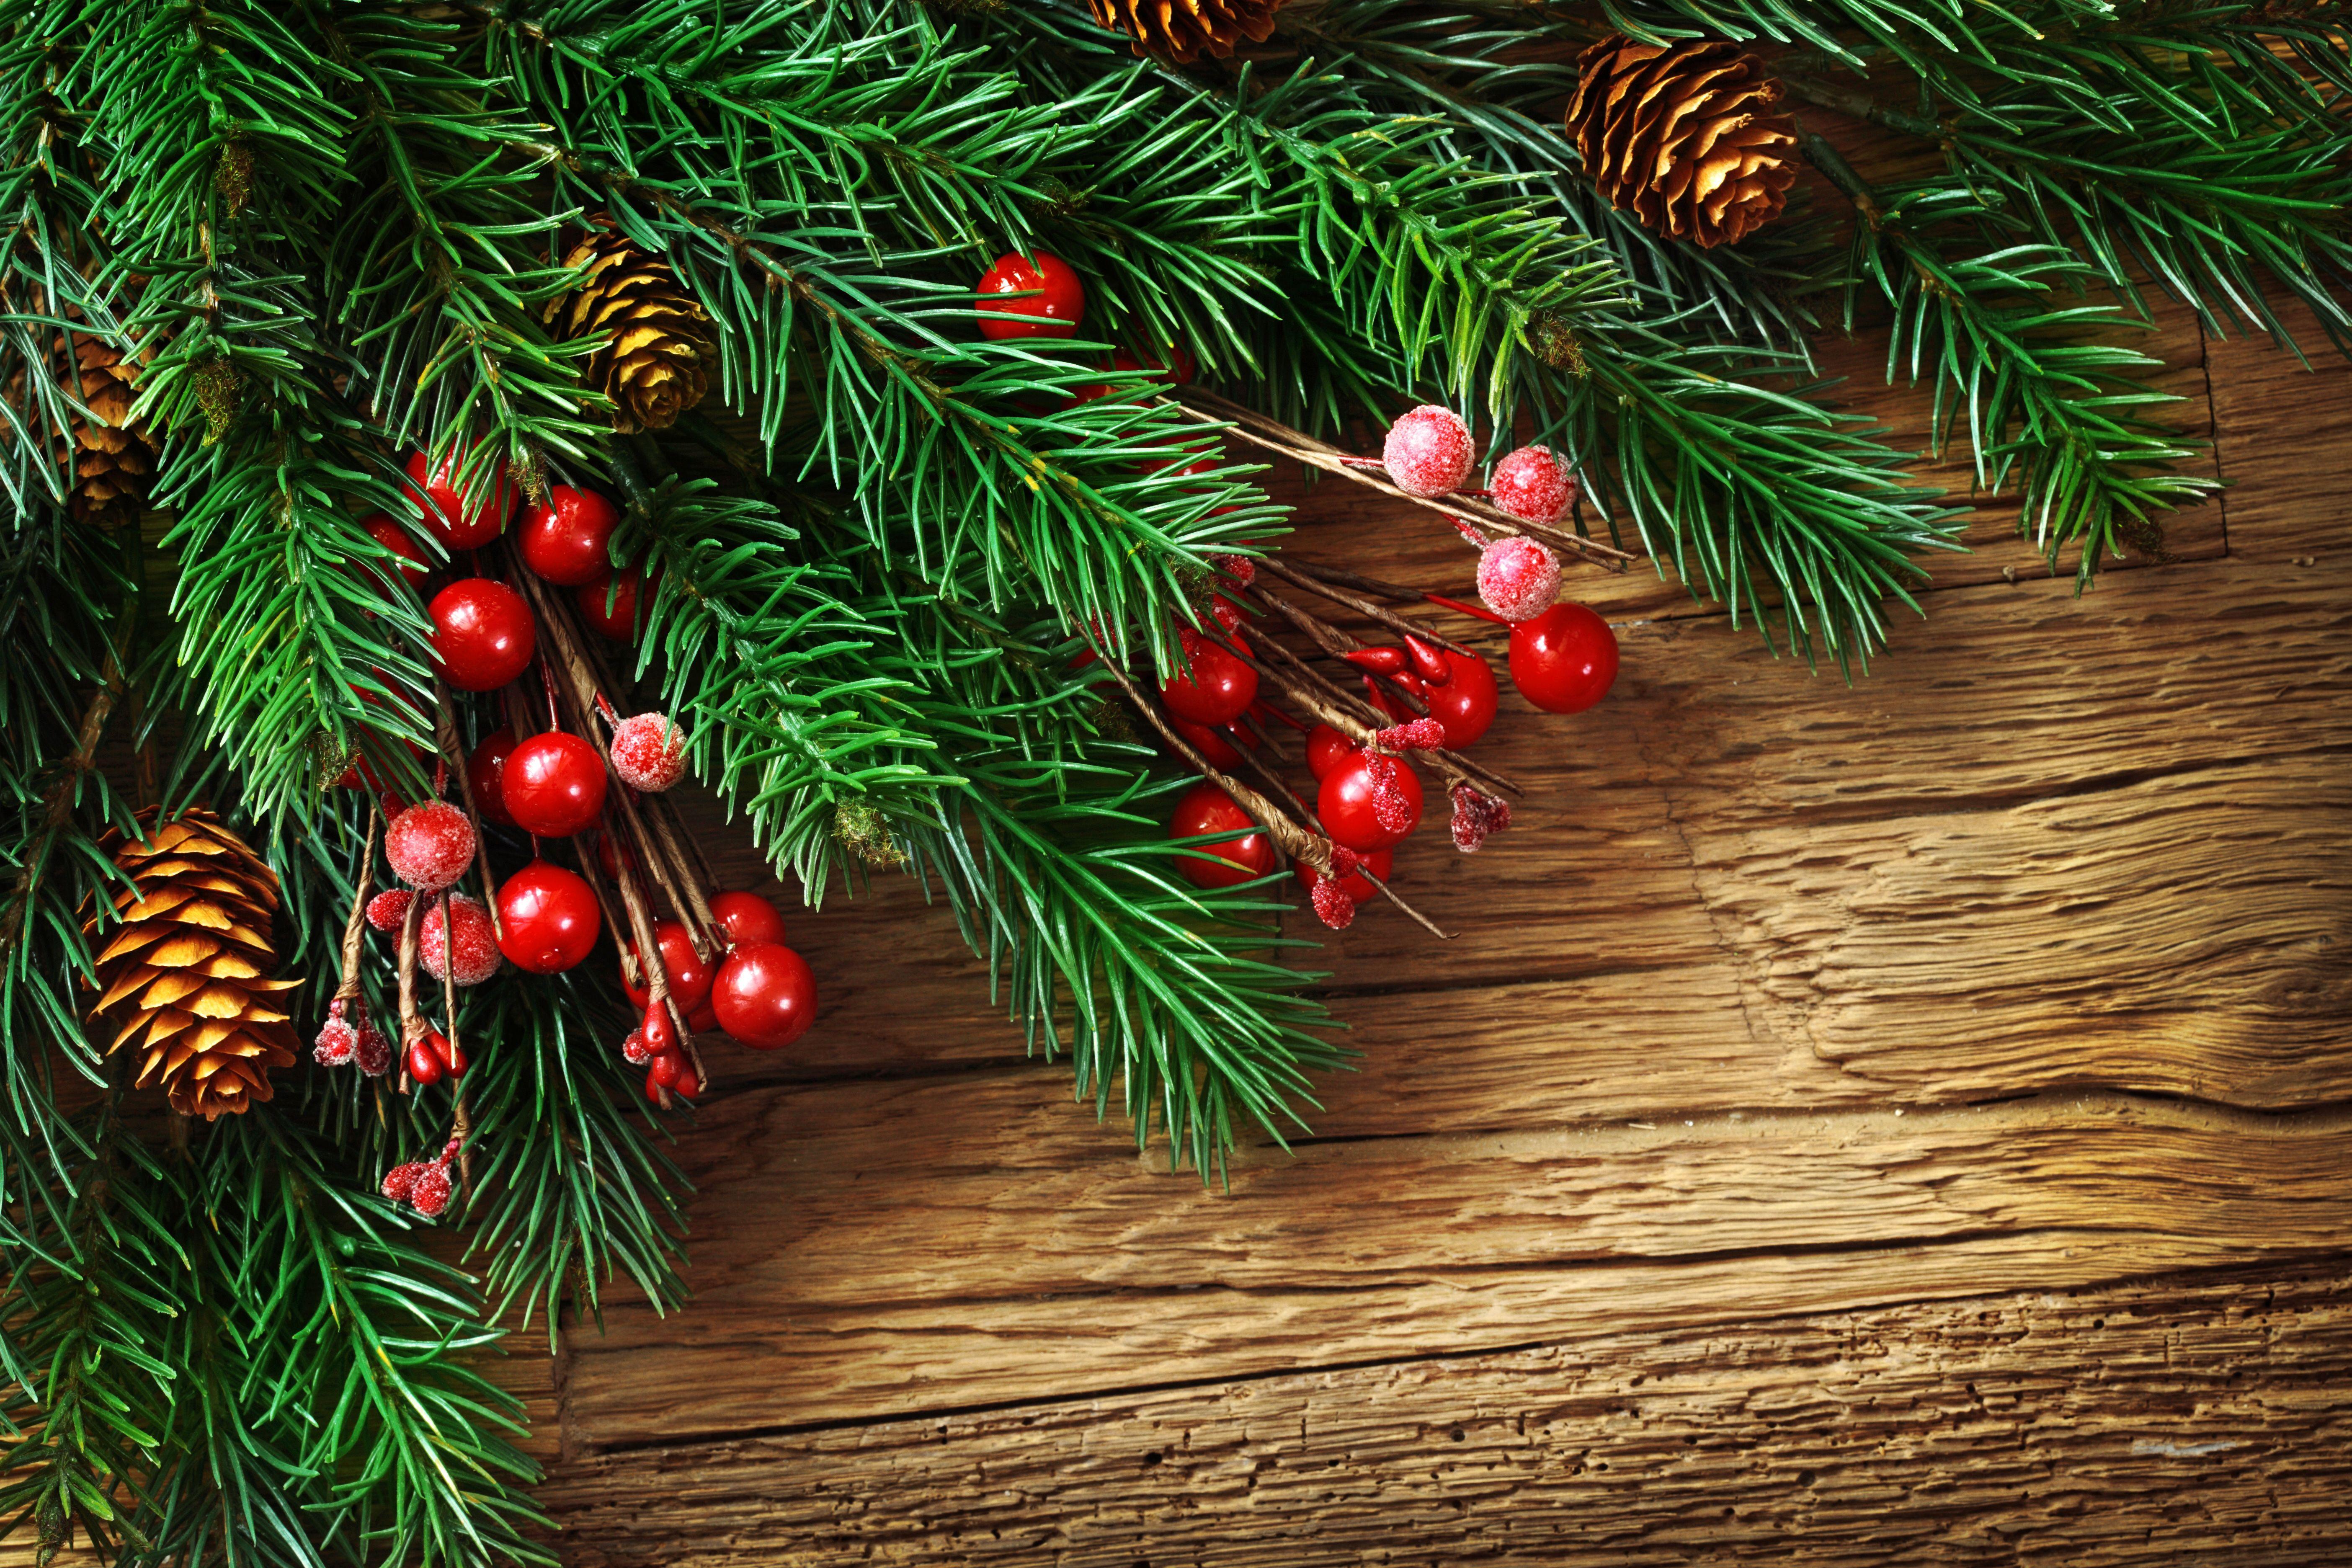 Wooden Christmas Backgrounds with Pine Branches​